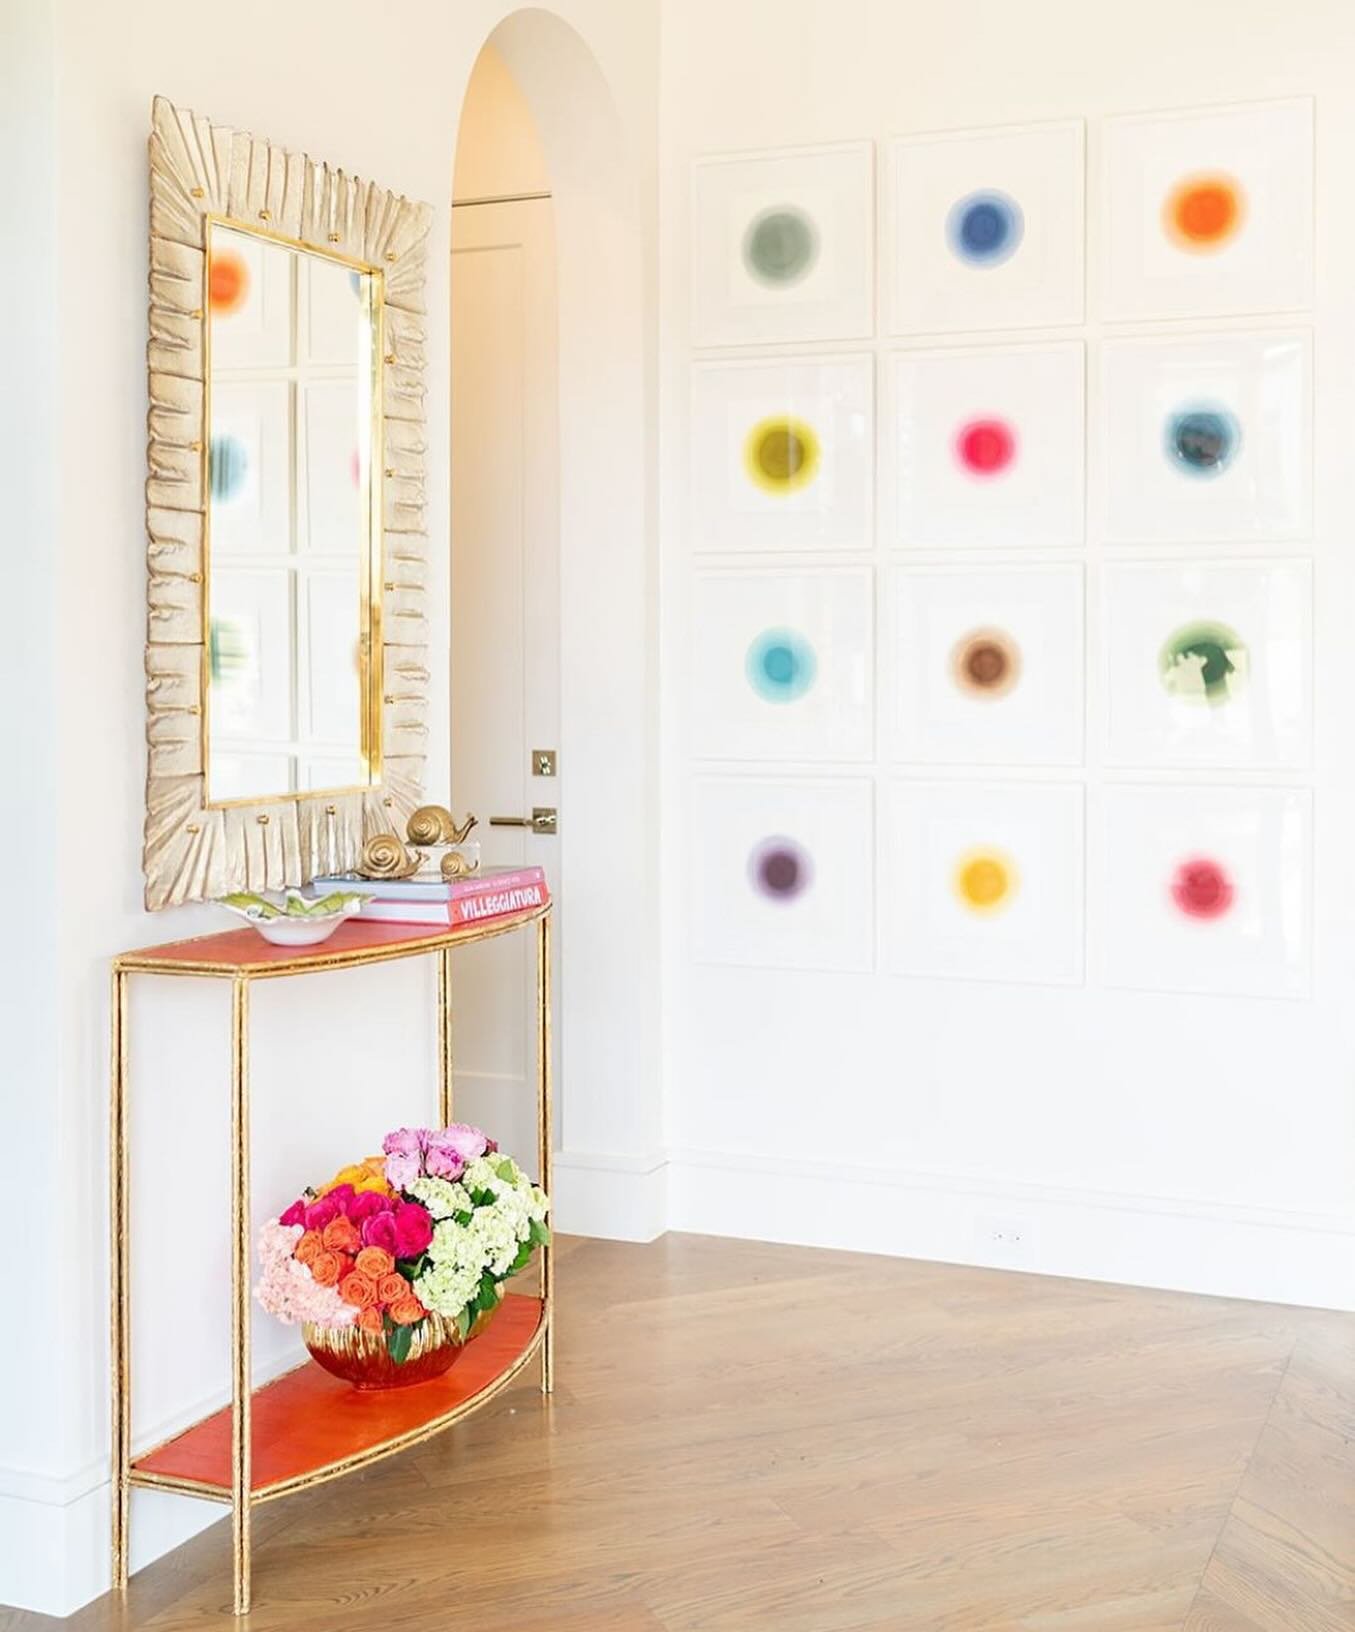 Thank you @trishsheatsid 
This truly is Spot On 🌈

Available through @blue_print_store 
Interiors by @trishsheatsid 
Build by @braswellhomes 
Photo by @gracehodophoto 

#watercolorart #interiorstyling #interiorsofinstagram #happyart #colorfulinterio